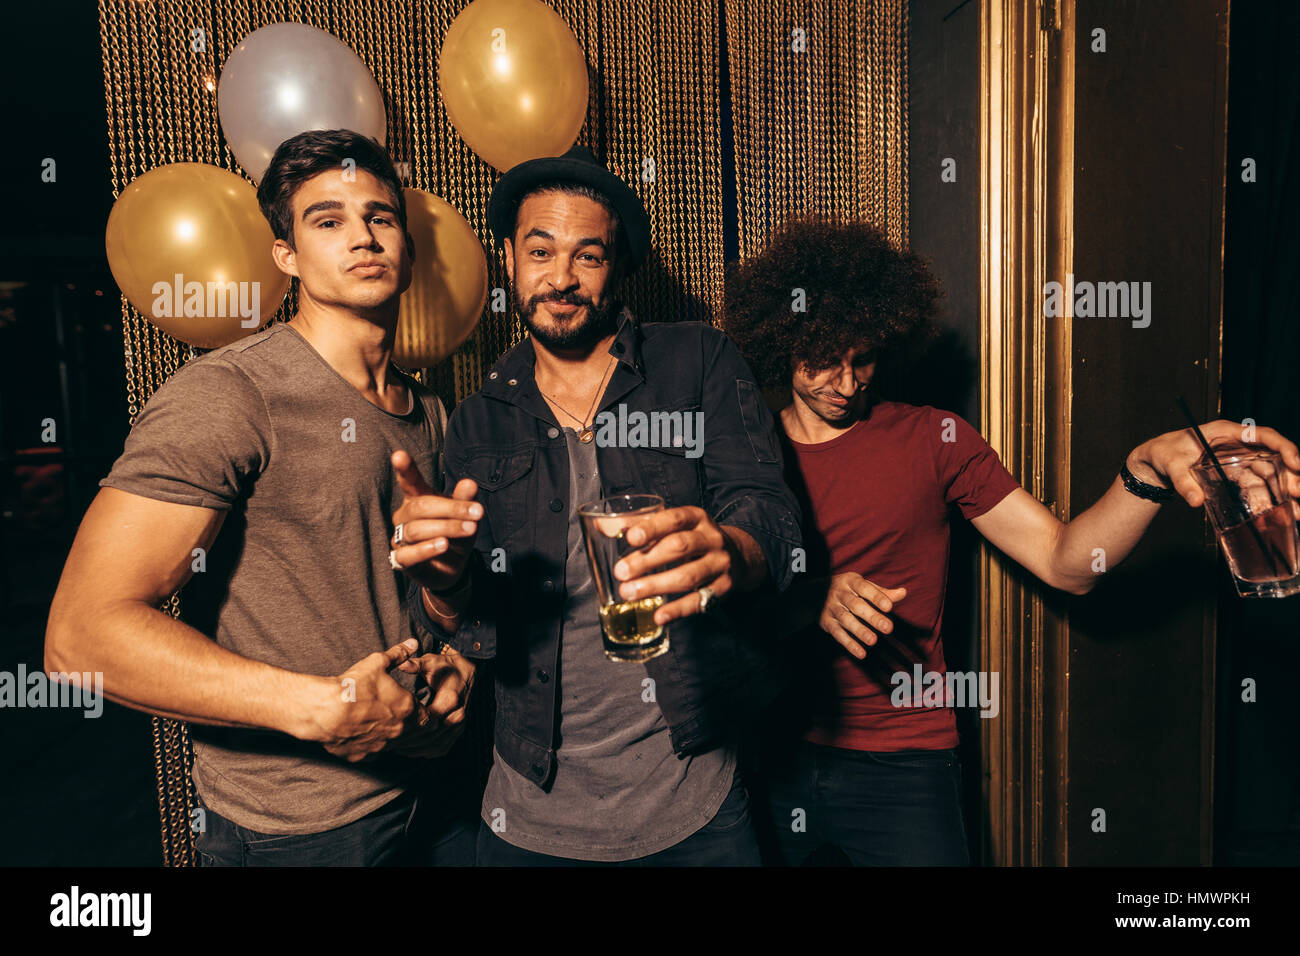 Portrait Of Three Young Men Having Fun At The Nightclub Group Of Men At Pub With Drinks Stock